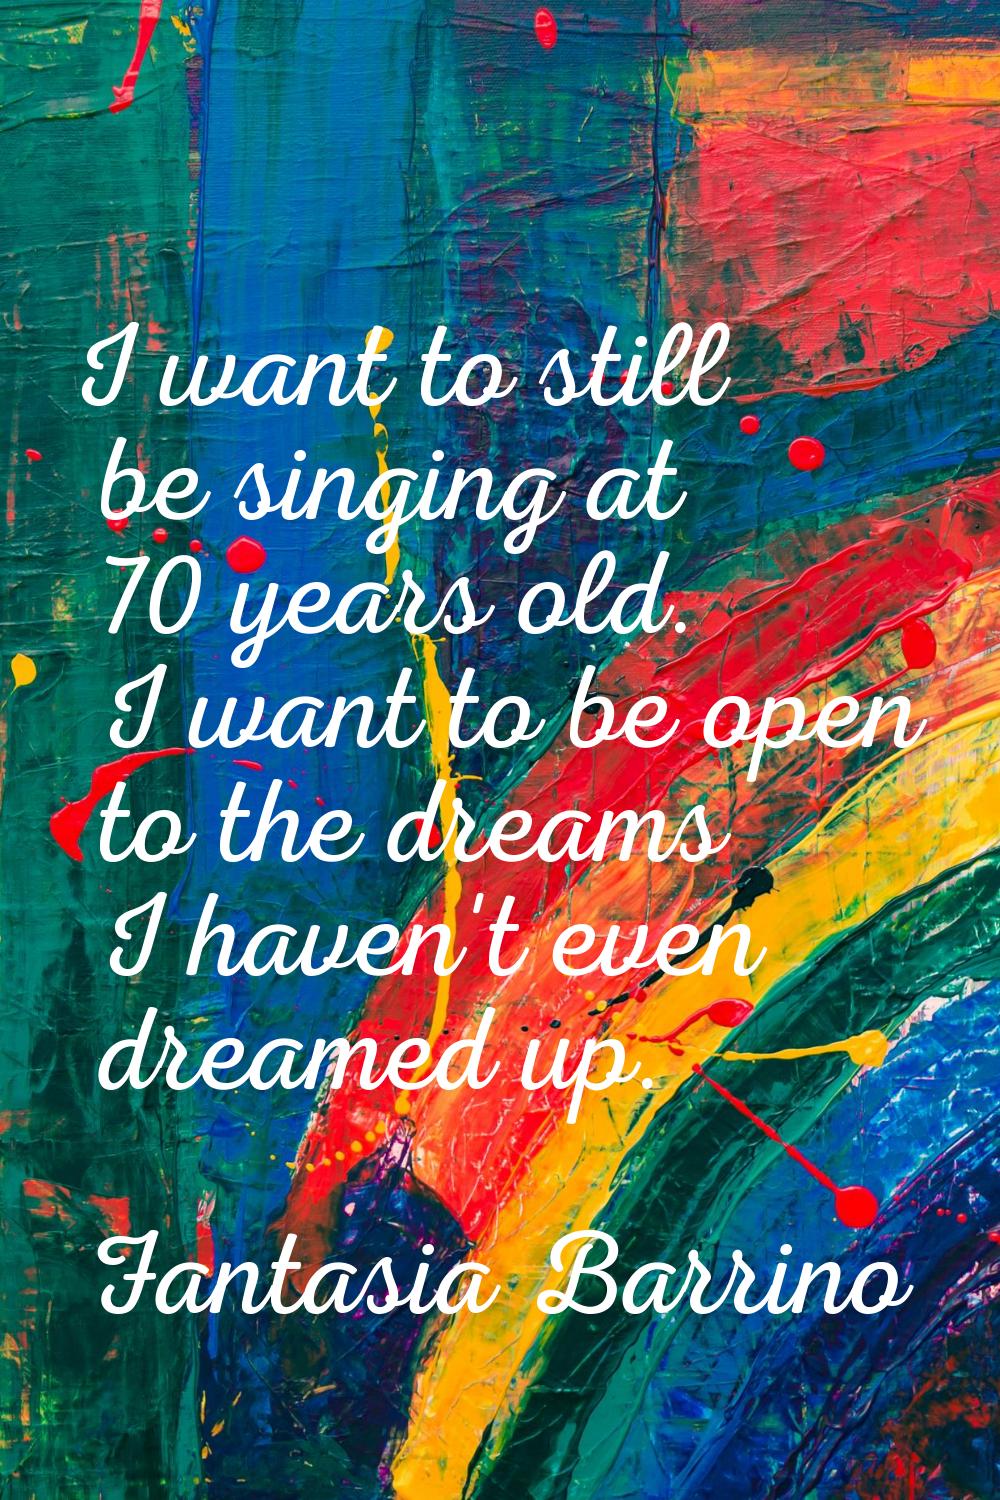 I want to still be singing at 70 years old. I want to be open to the dreams I haven't even dreamed 